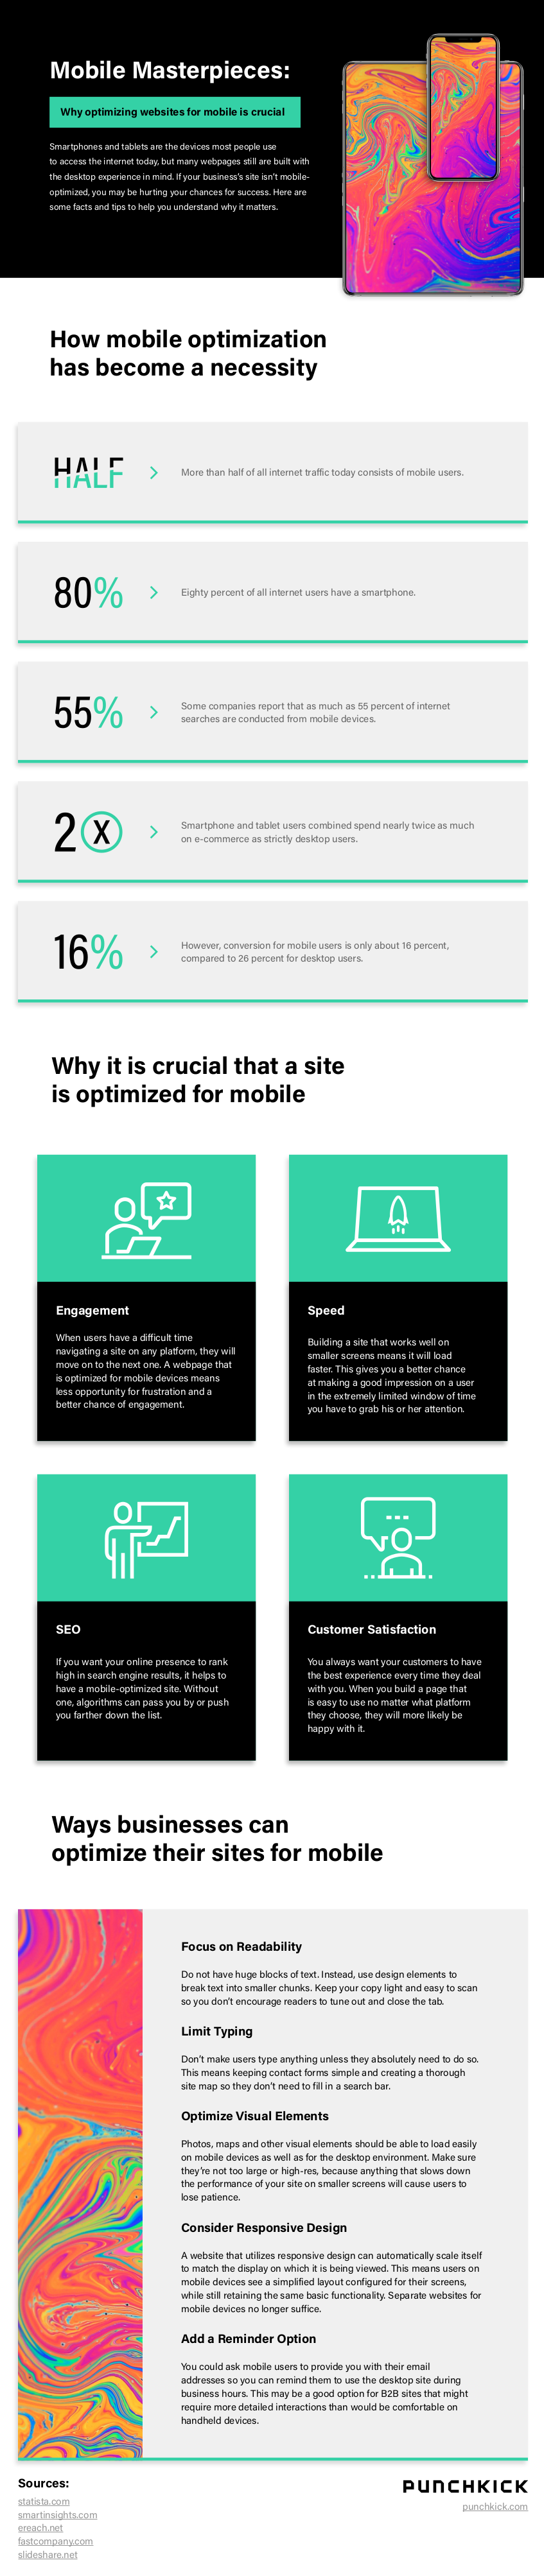 Punchkick Interactive explains why optimizing websites for mobile devices is vital and how to optimize for them